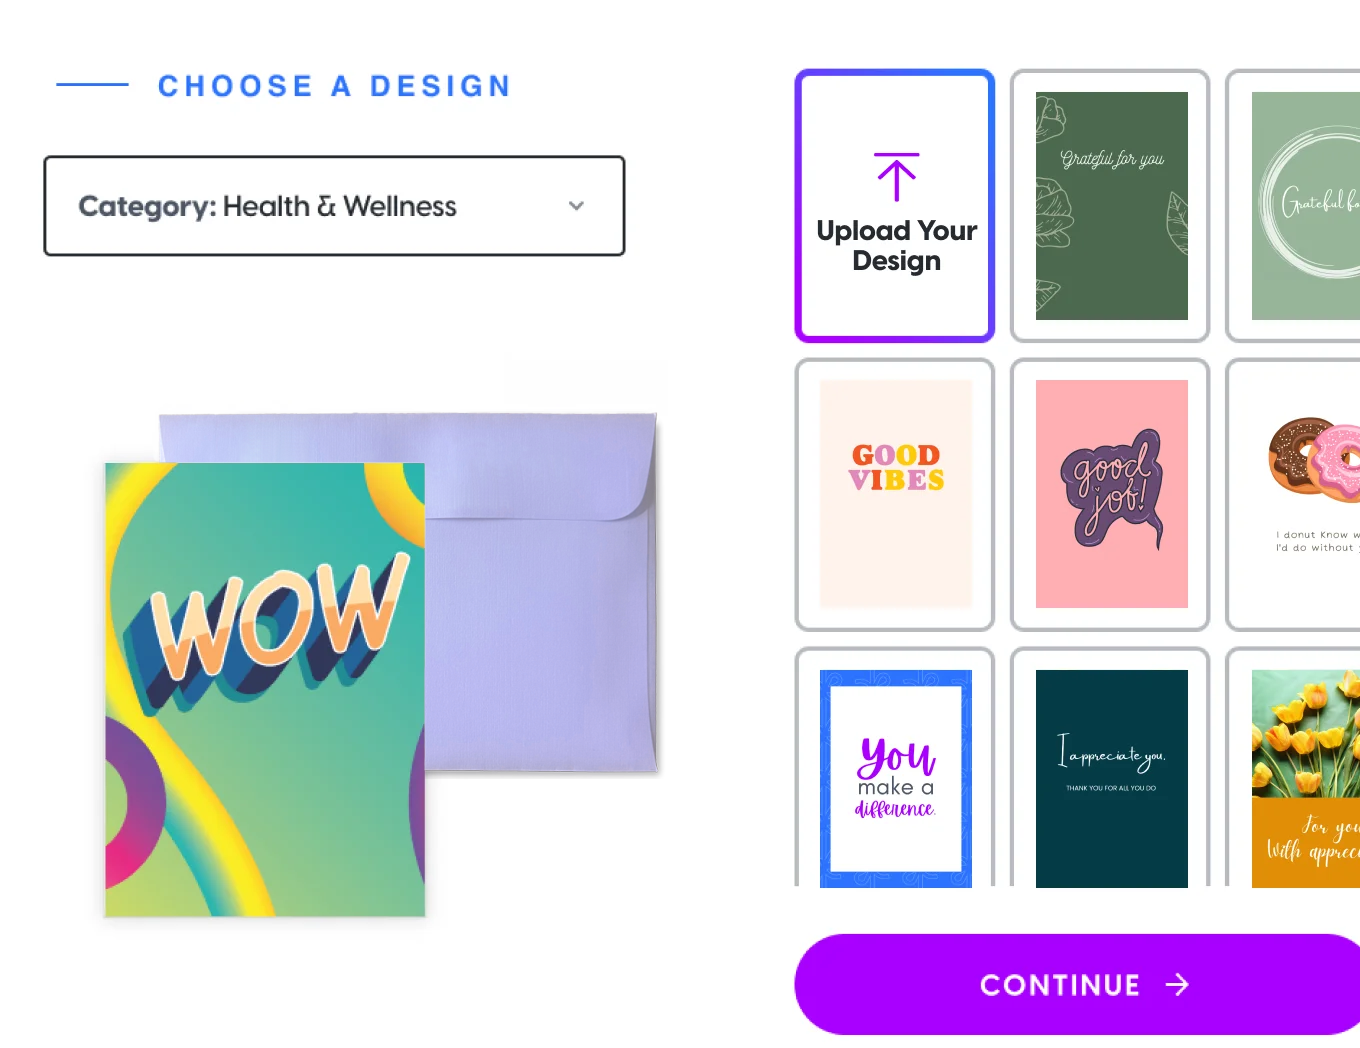 Webpage showing greeting card designs with a "Choose a Design" category filter.